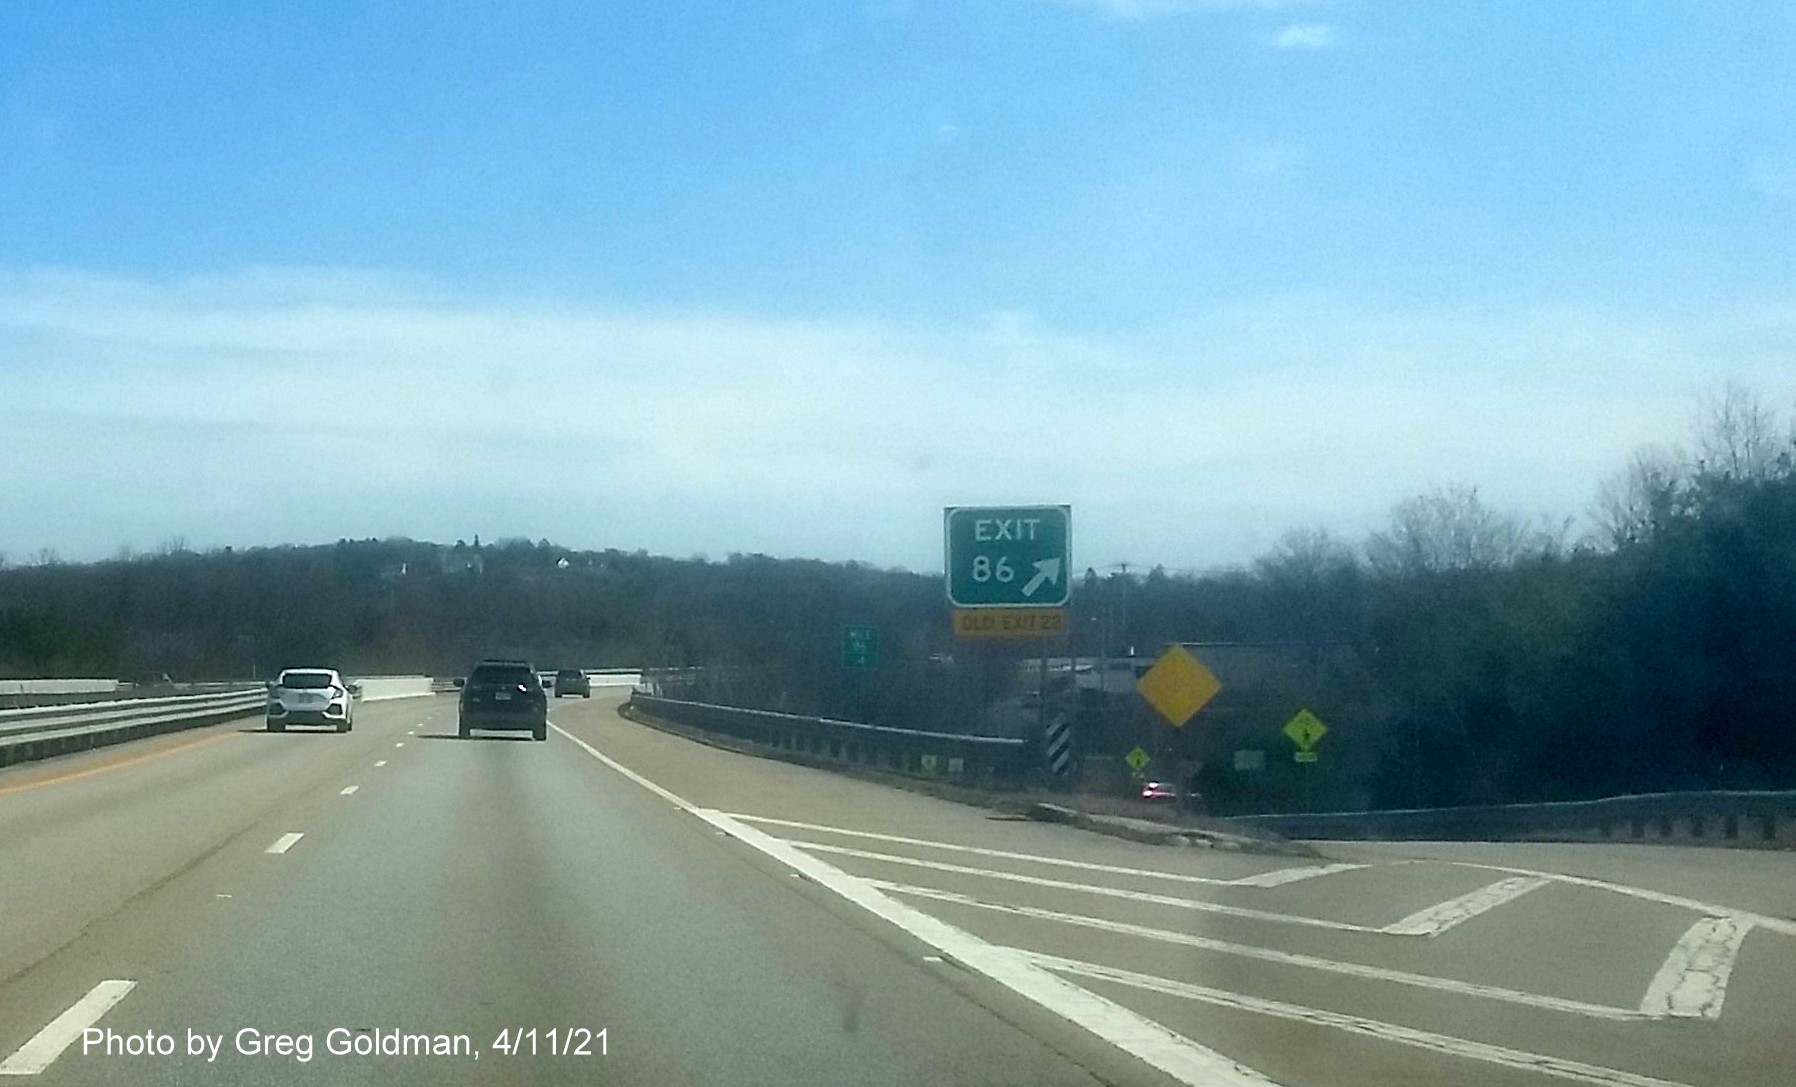 Image of gore sign for MA 68 Exit with new milepost based exit number and yellow Old Exit 24 advisory sign attached below on MA 2 East in Gardner, by Greg Goldman, April 2021